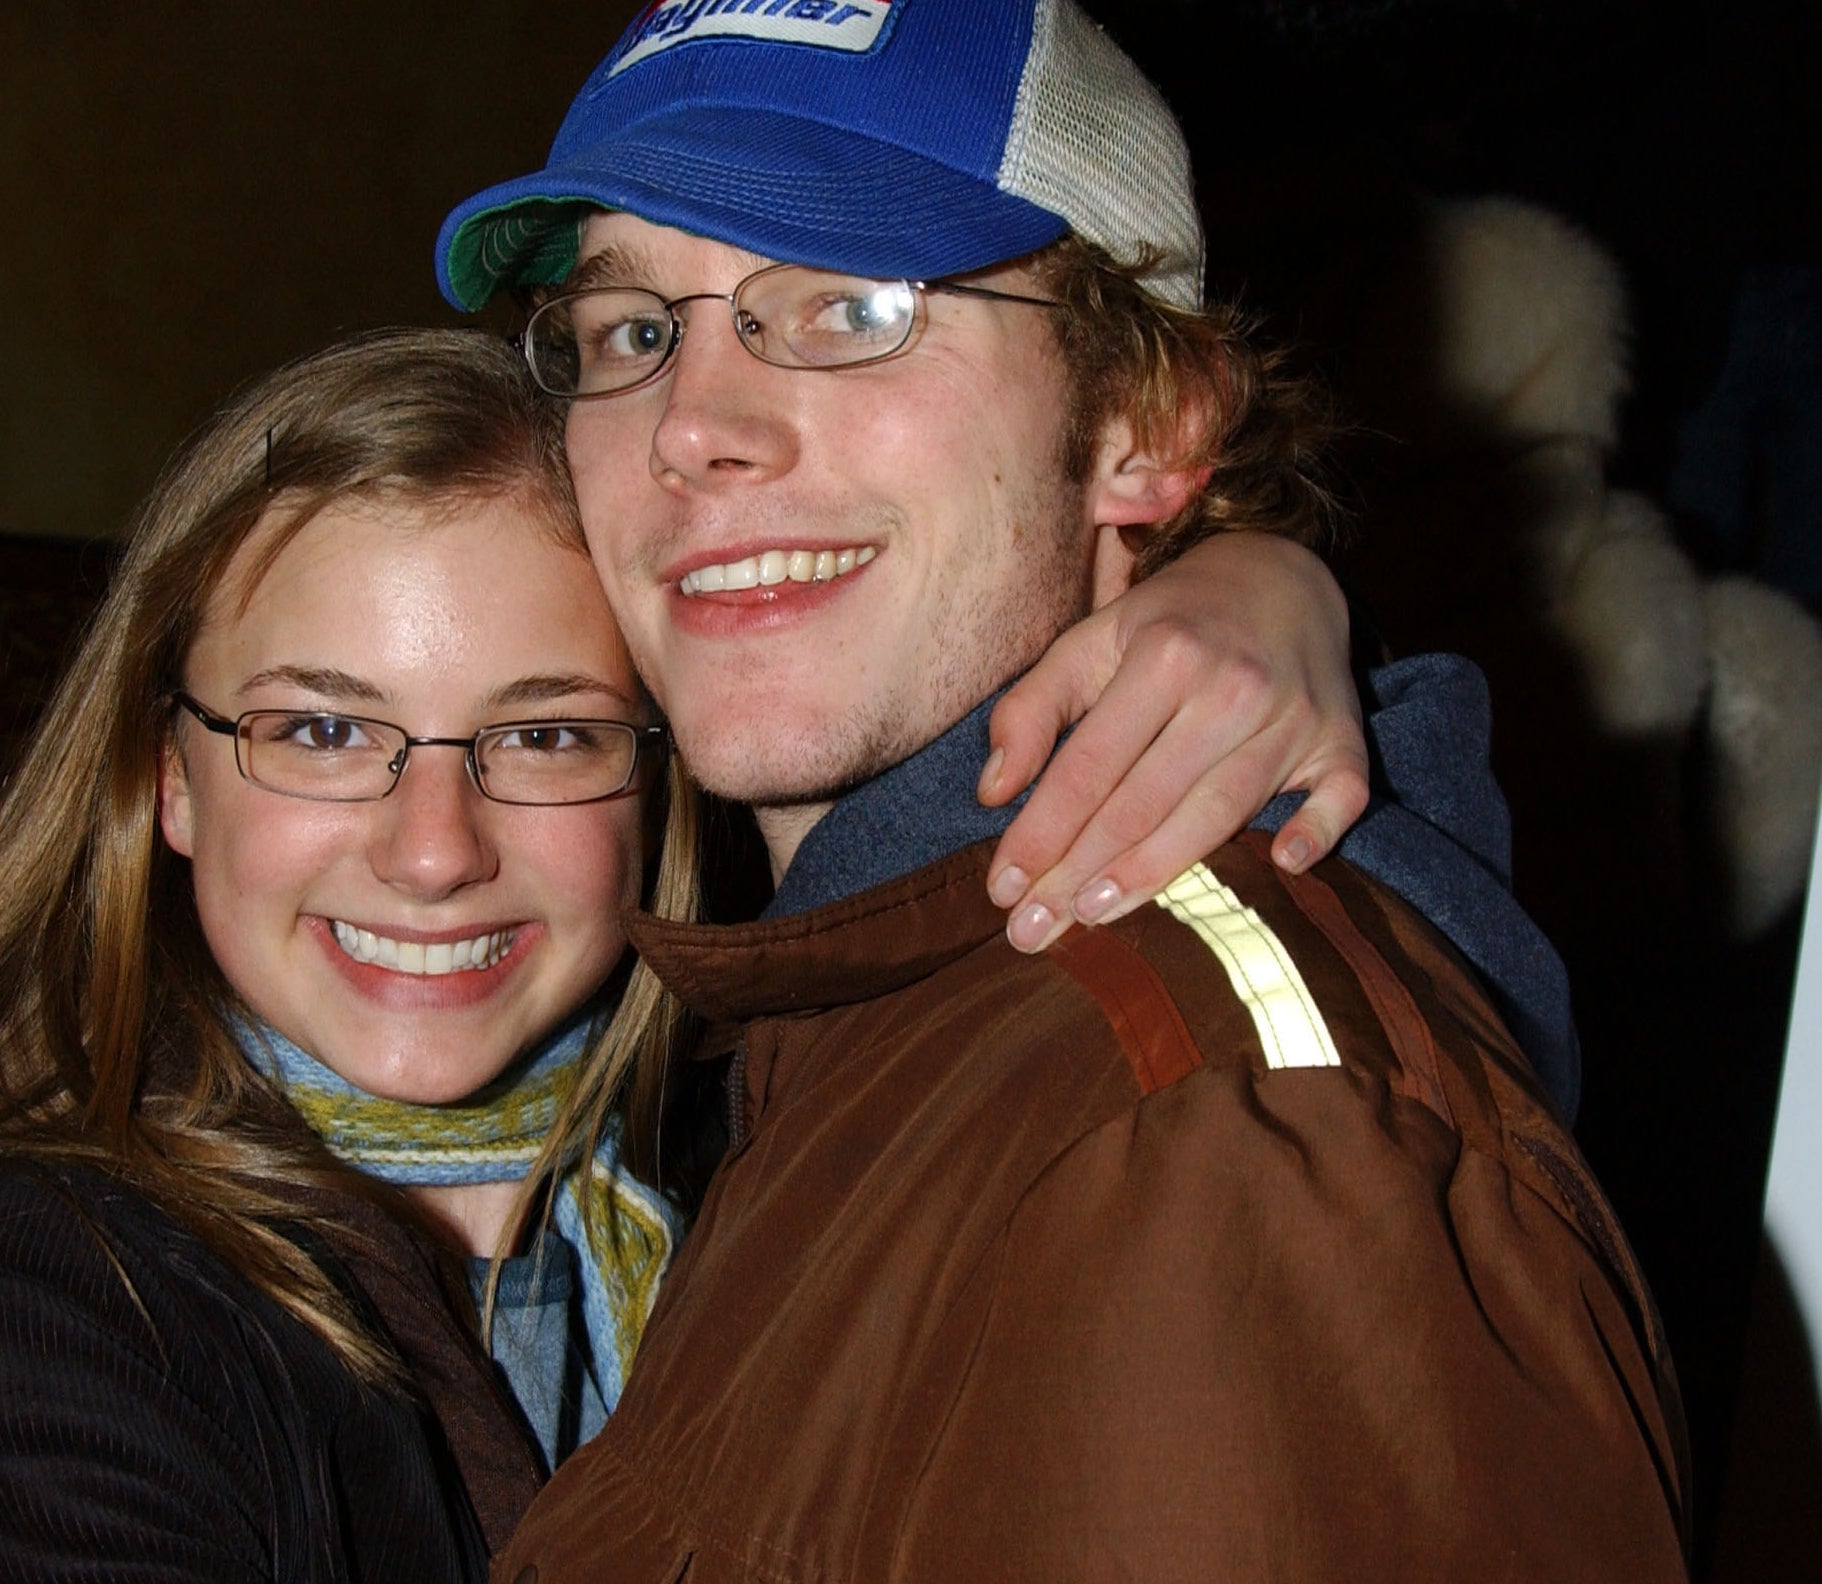 Emily VanCamp and Chris Pratt in the early 2000s